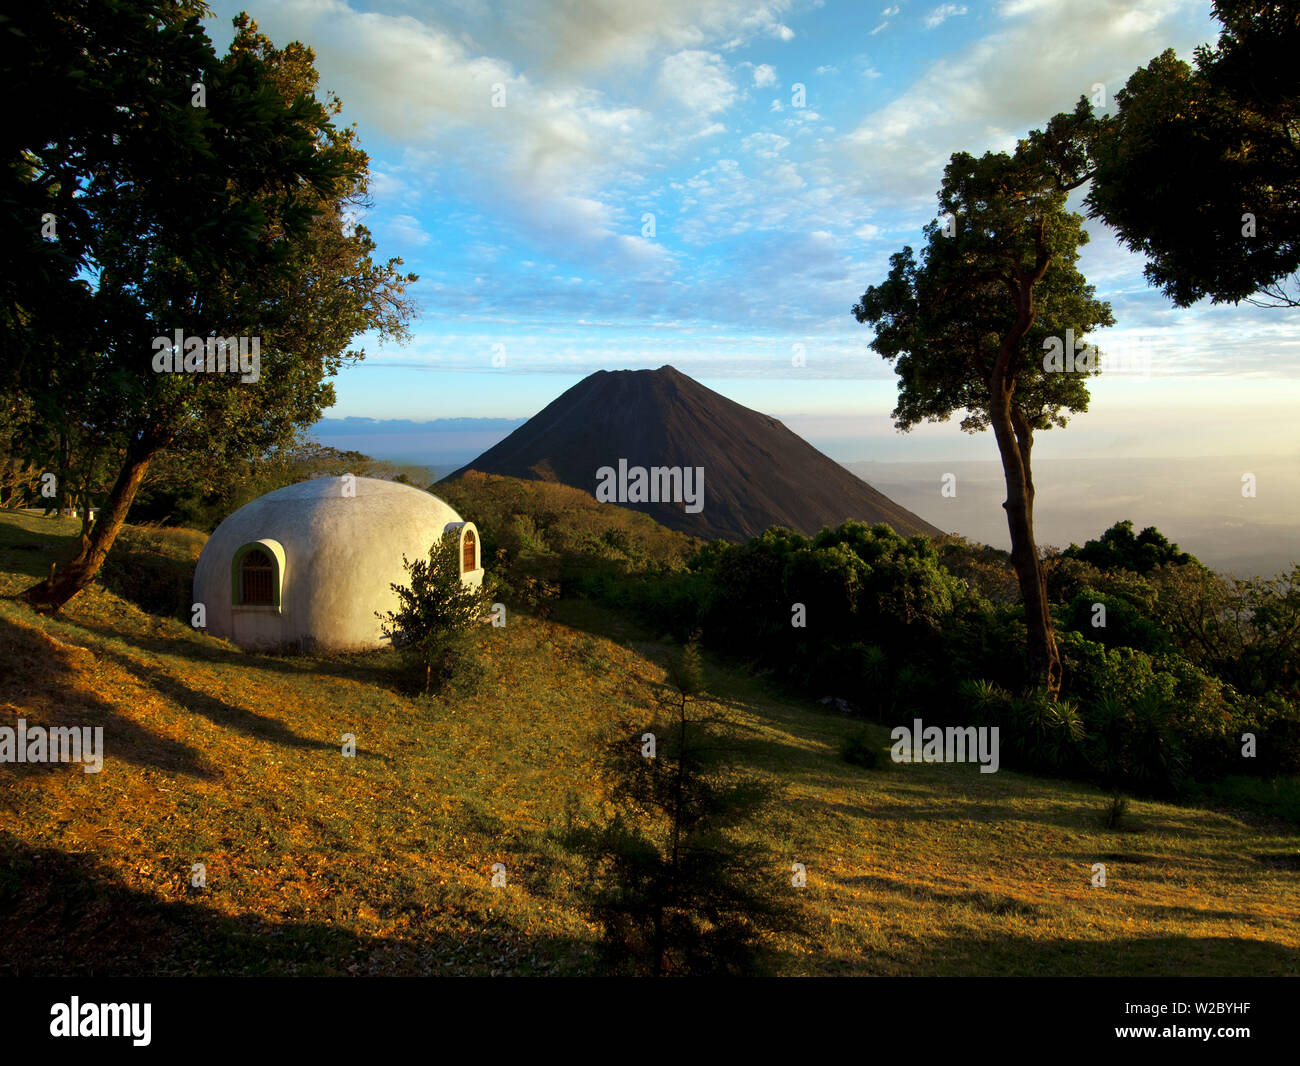 El Salvador, Cerro Verde National Park, Volcano National Park, Izalco Volcano, Once Referred To As The 'Lighthouse Of The Pacific', Campo Bello, Igloo Style Cabinas For Overnight Sleeping Stock Photo